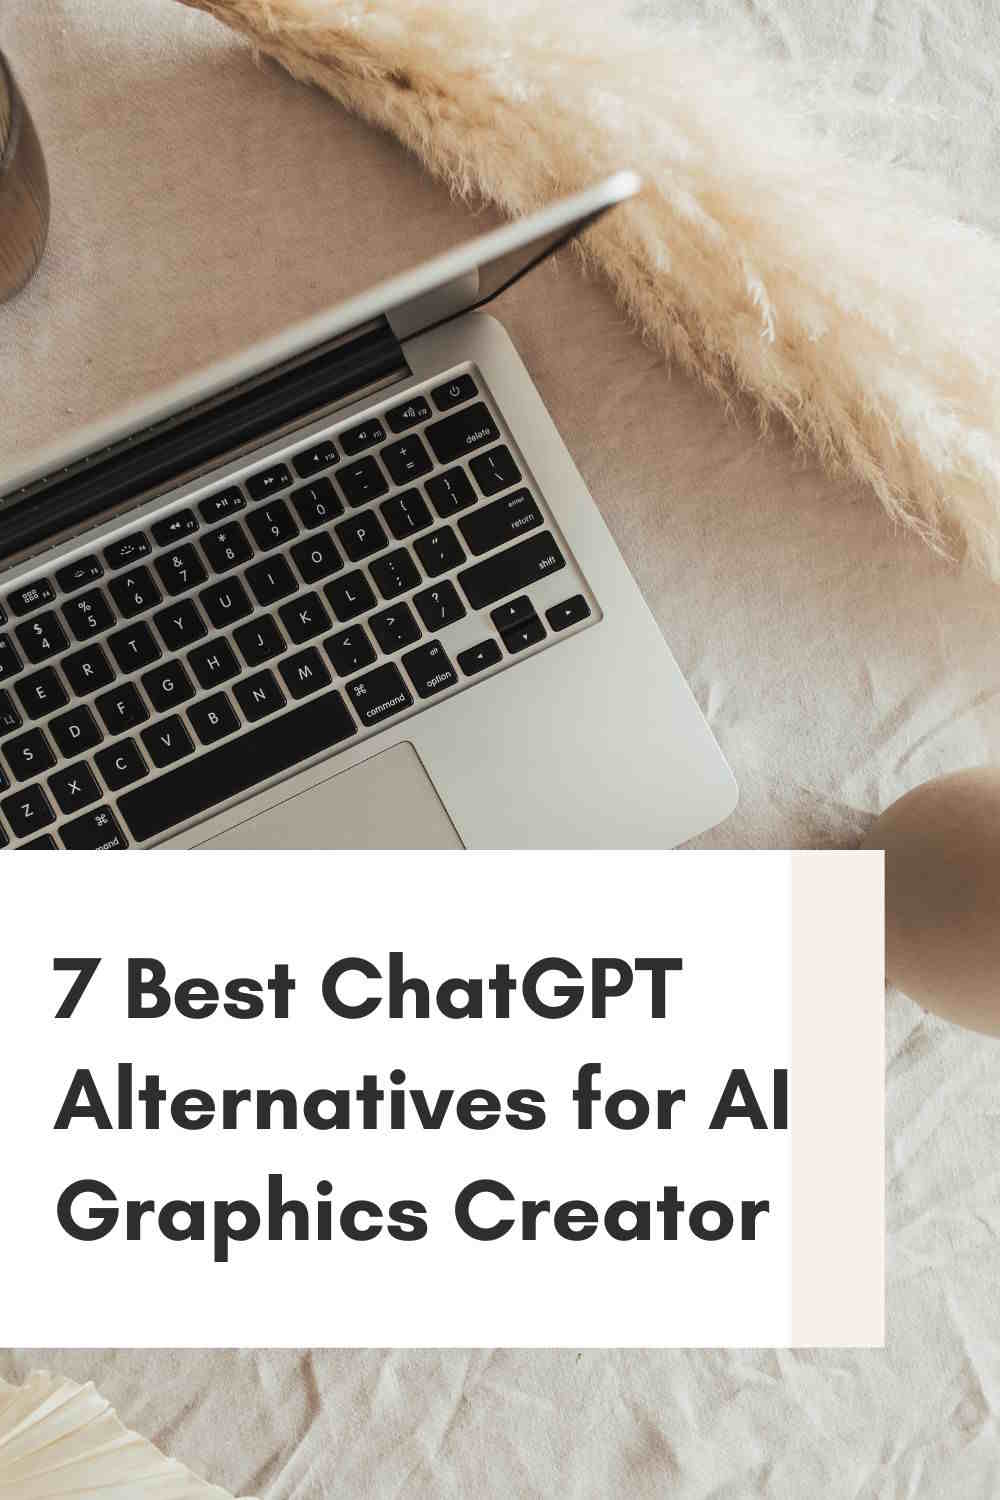 7 Best ChatGPT Alternatives for AI Graphics Creator